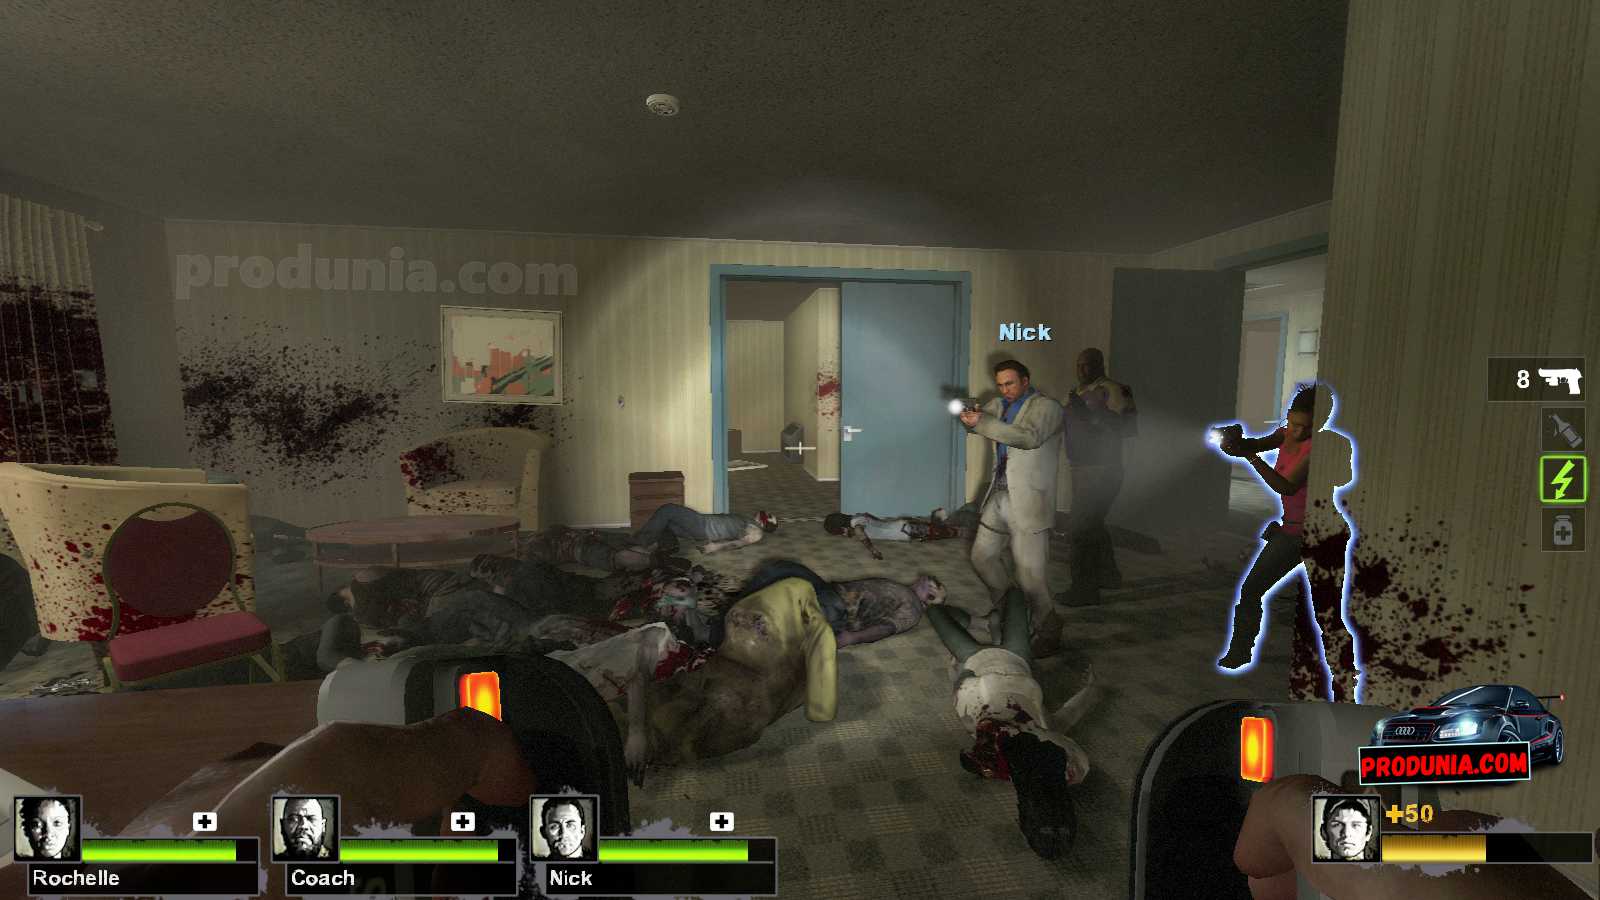 left 4 dead 2 free download for pc windows 7